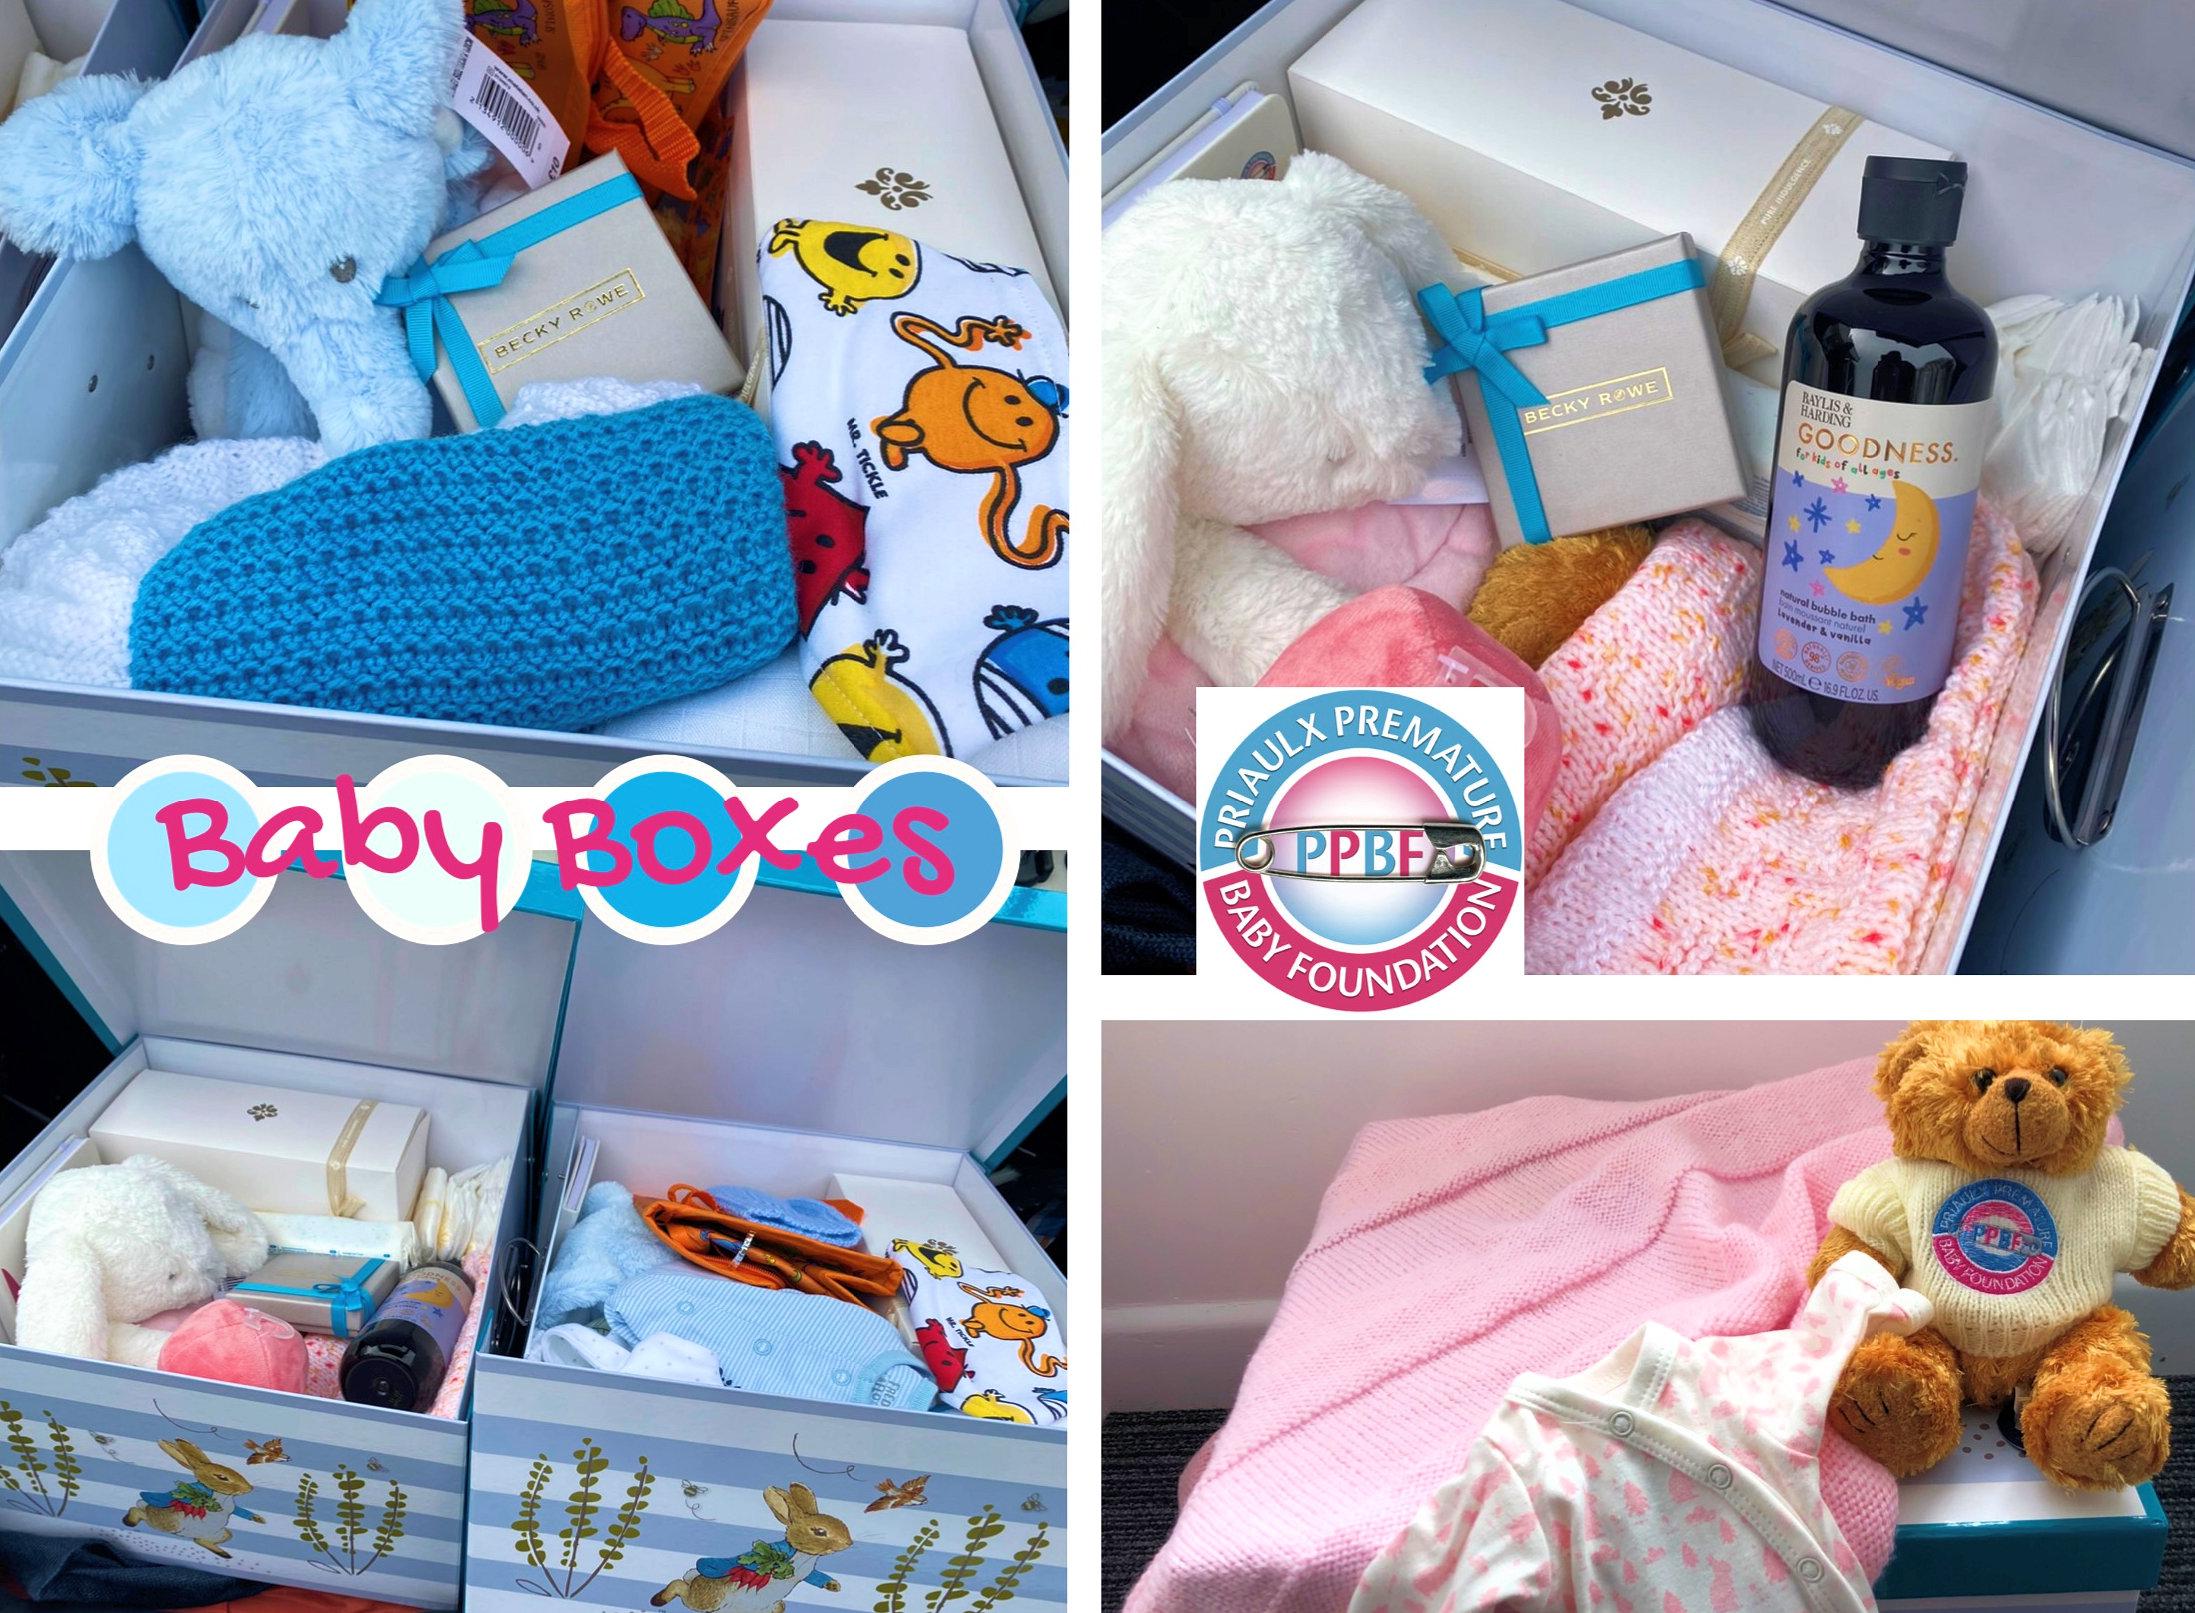 PPBF Baby Boxes